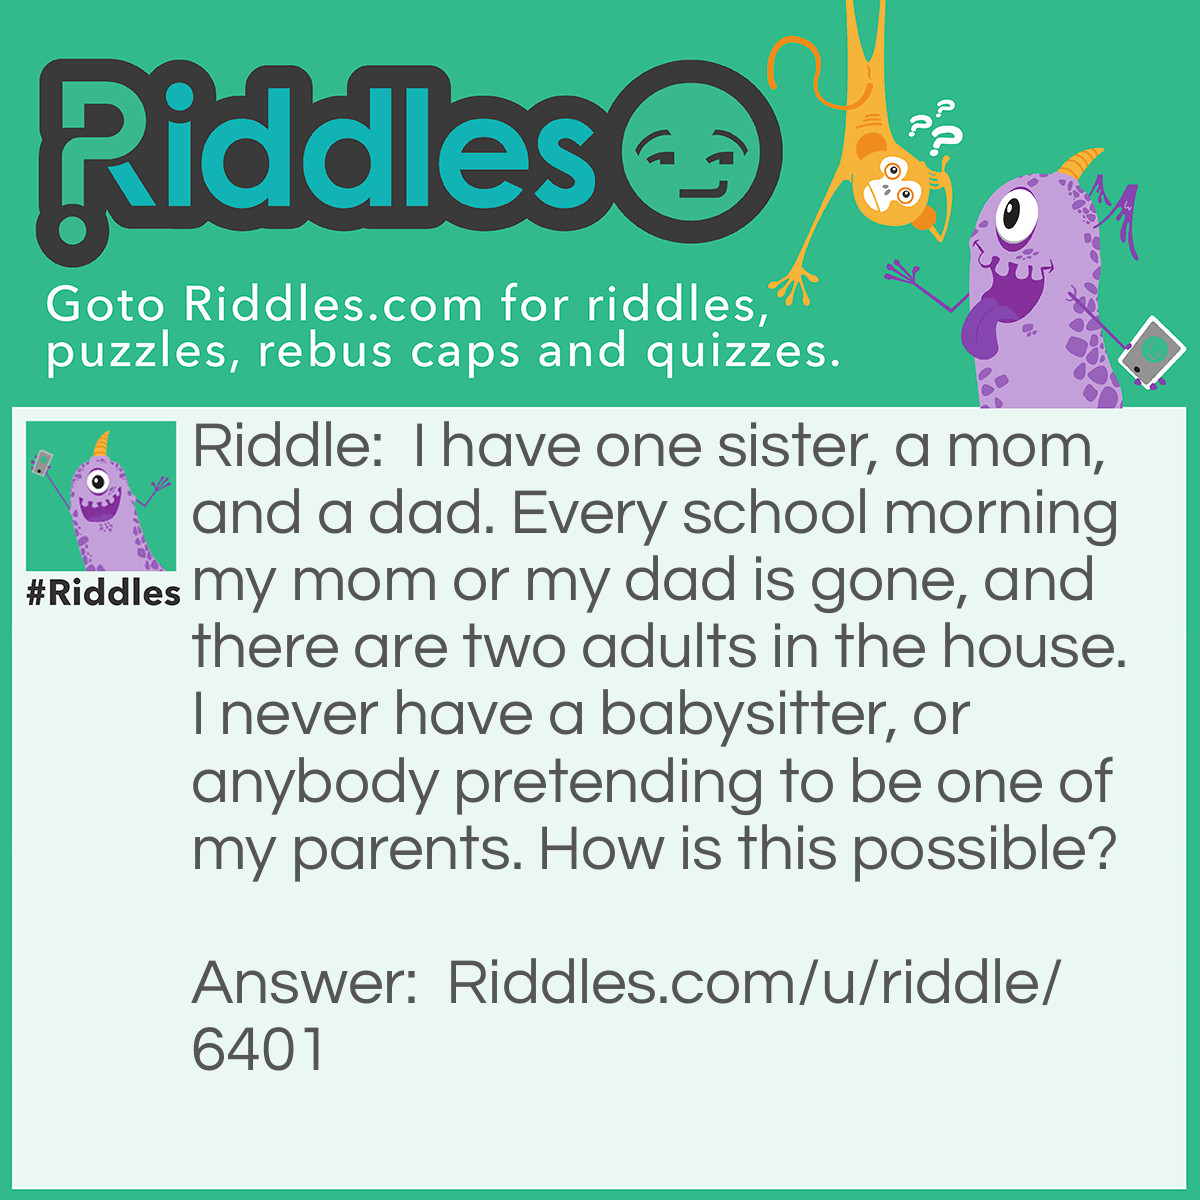 Riddle: I have one sister, a mom, and a dad. Every school morning my mom or my dad is gone, and there are two adults in the house. I never have a babysitter, or anybody pretending to be one of my parents. How is this possible? Answer: My sister is 18, which is considered an adult. She does not want to go to college, so she is with me every morning!